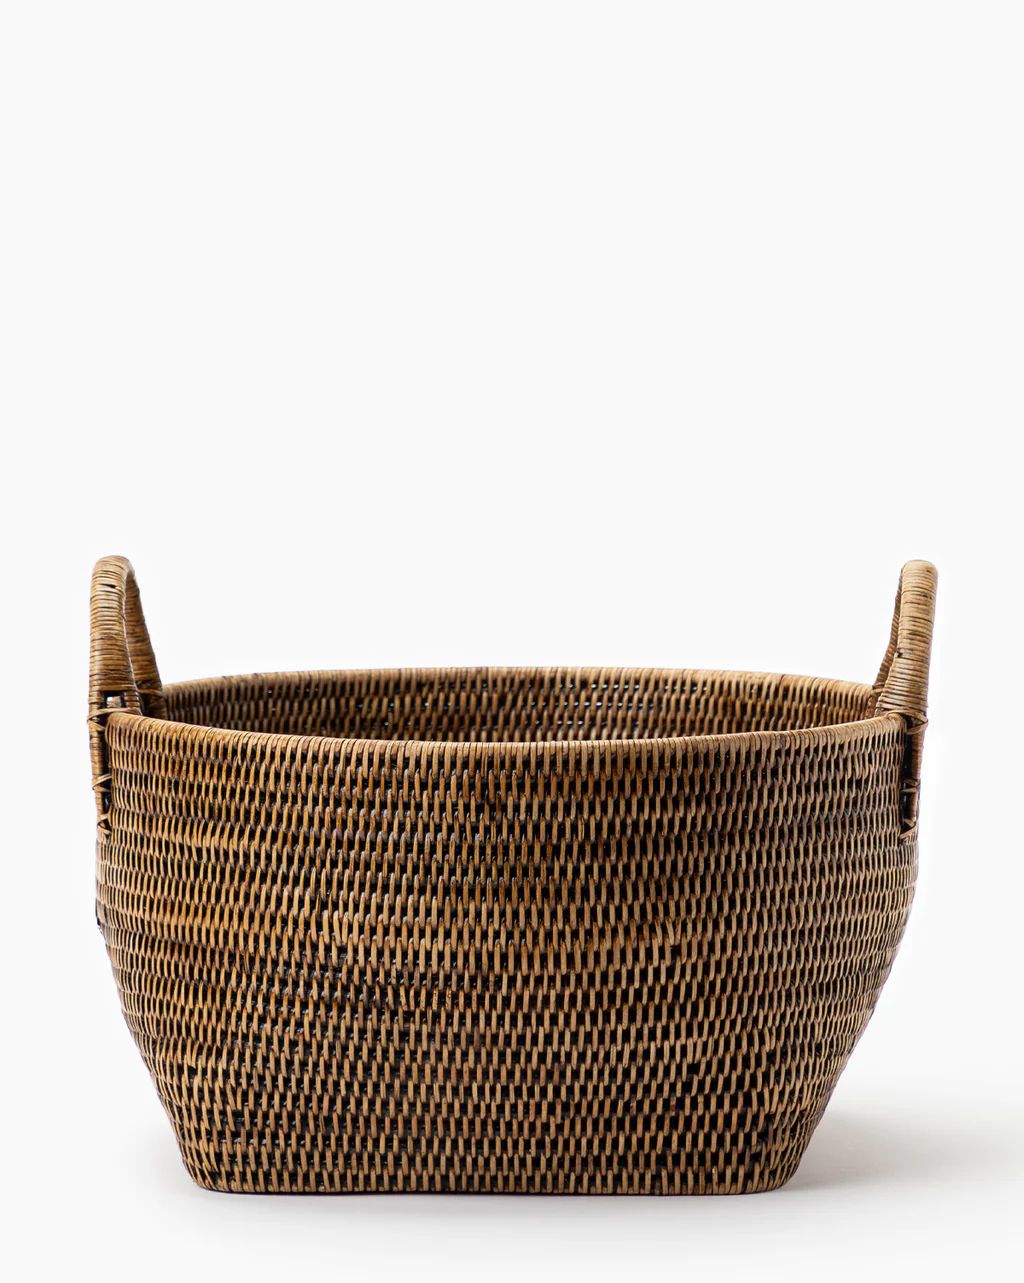 Orchard Baskets | McGee & Co.